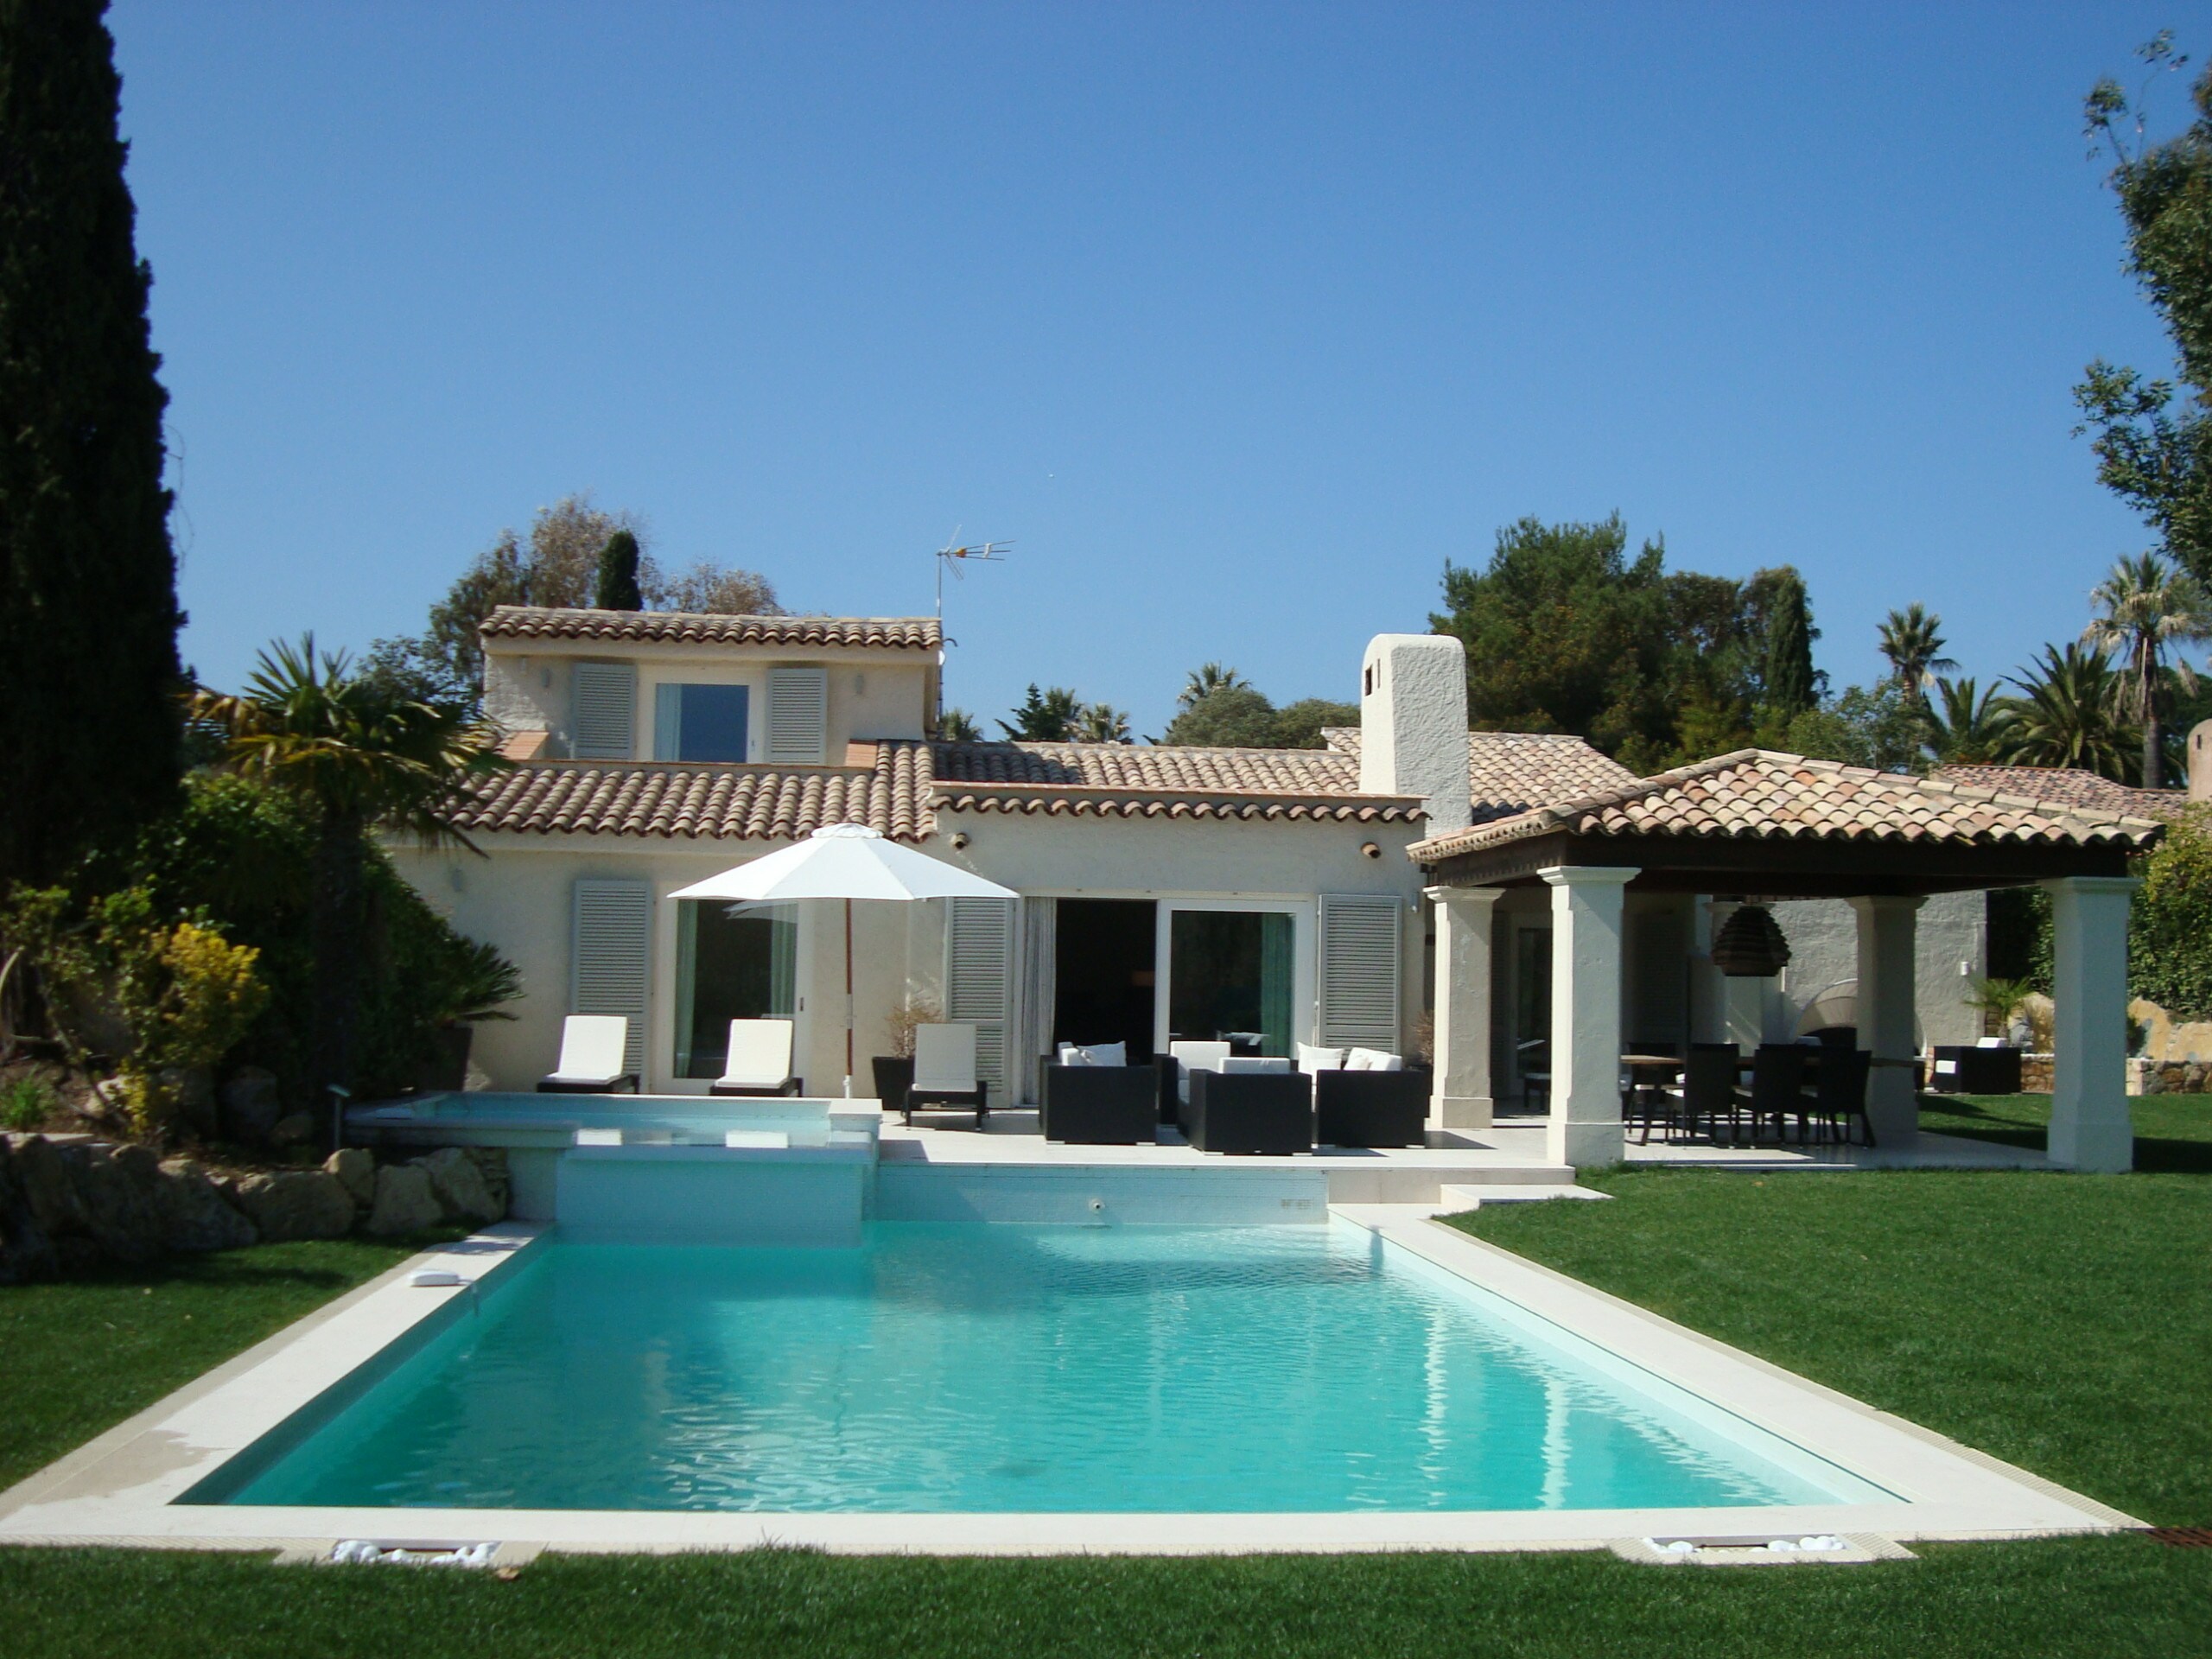 Property Image 1 - 6 bedroom family villa with AC, pool and 2 minutes’ walk to the local beach